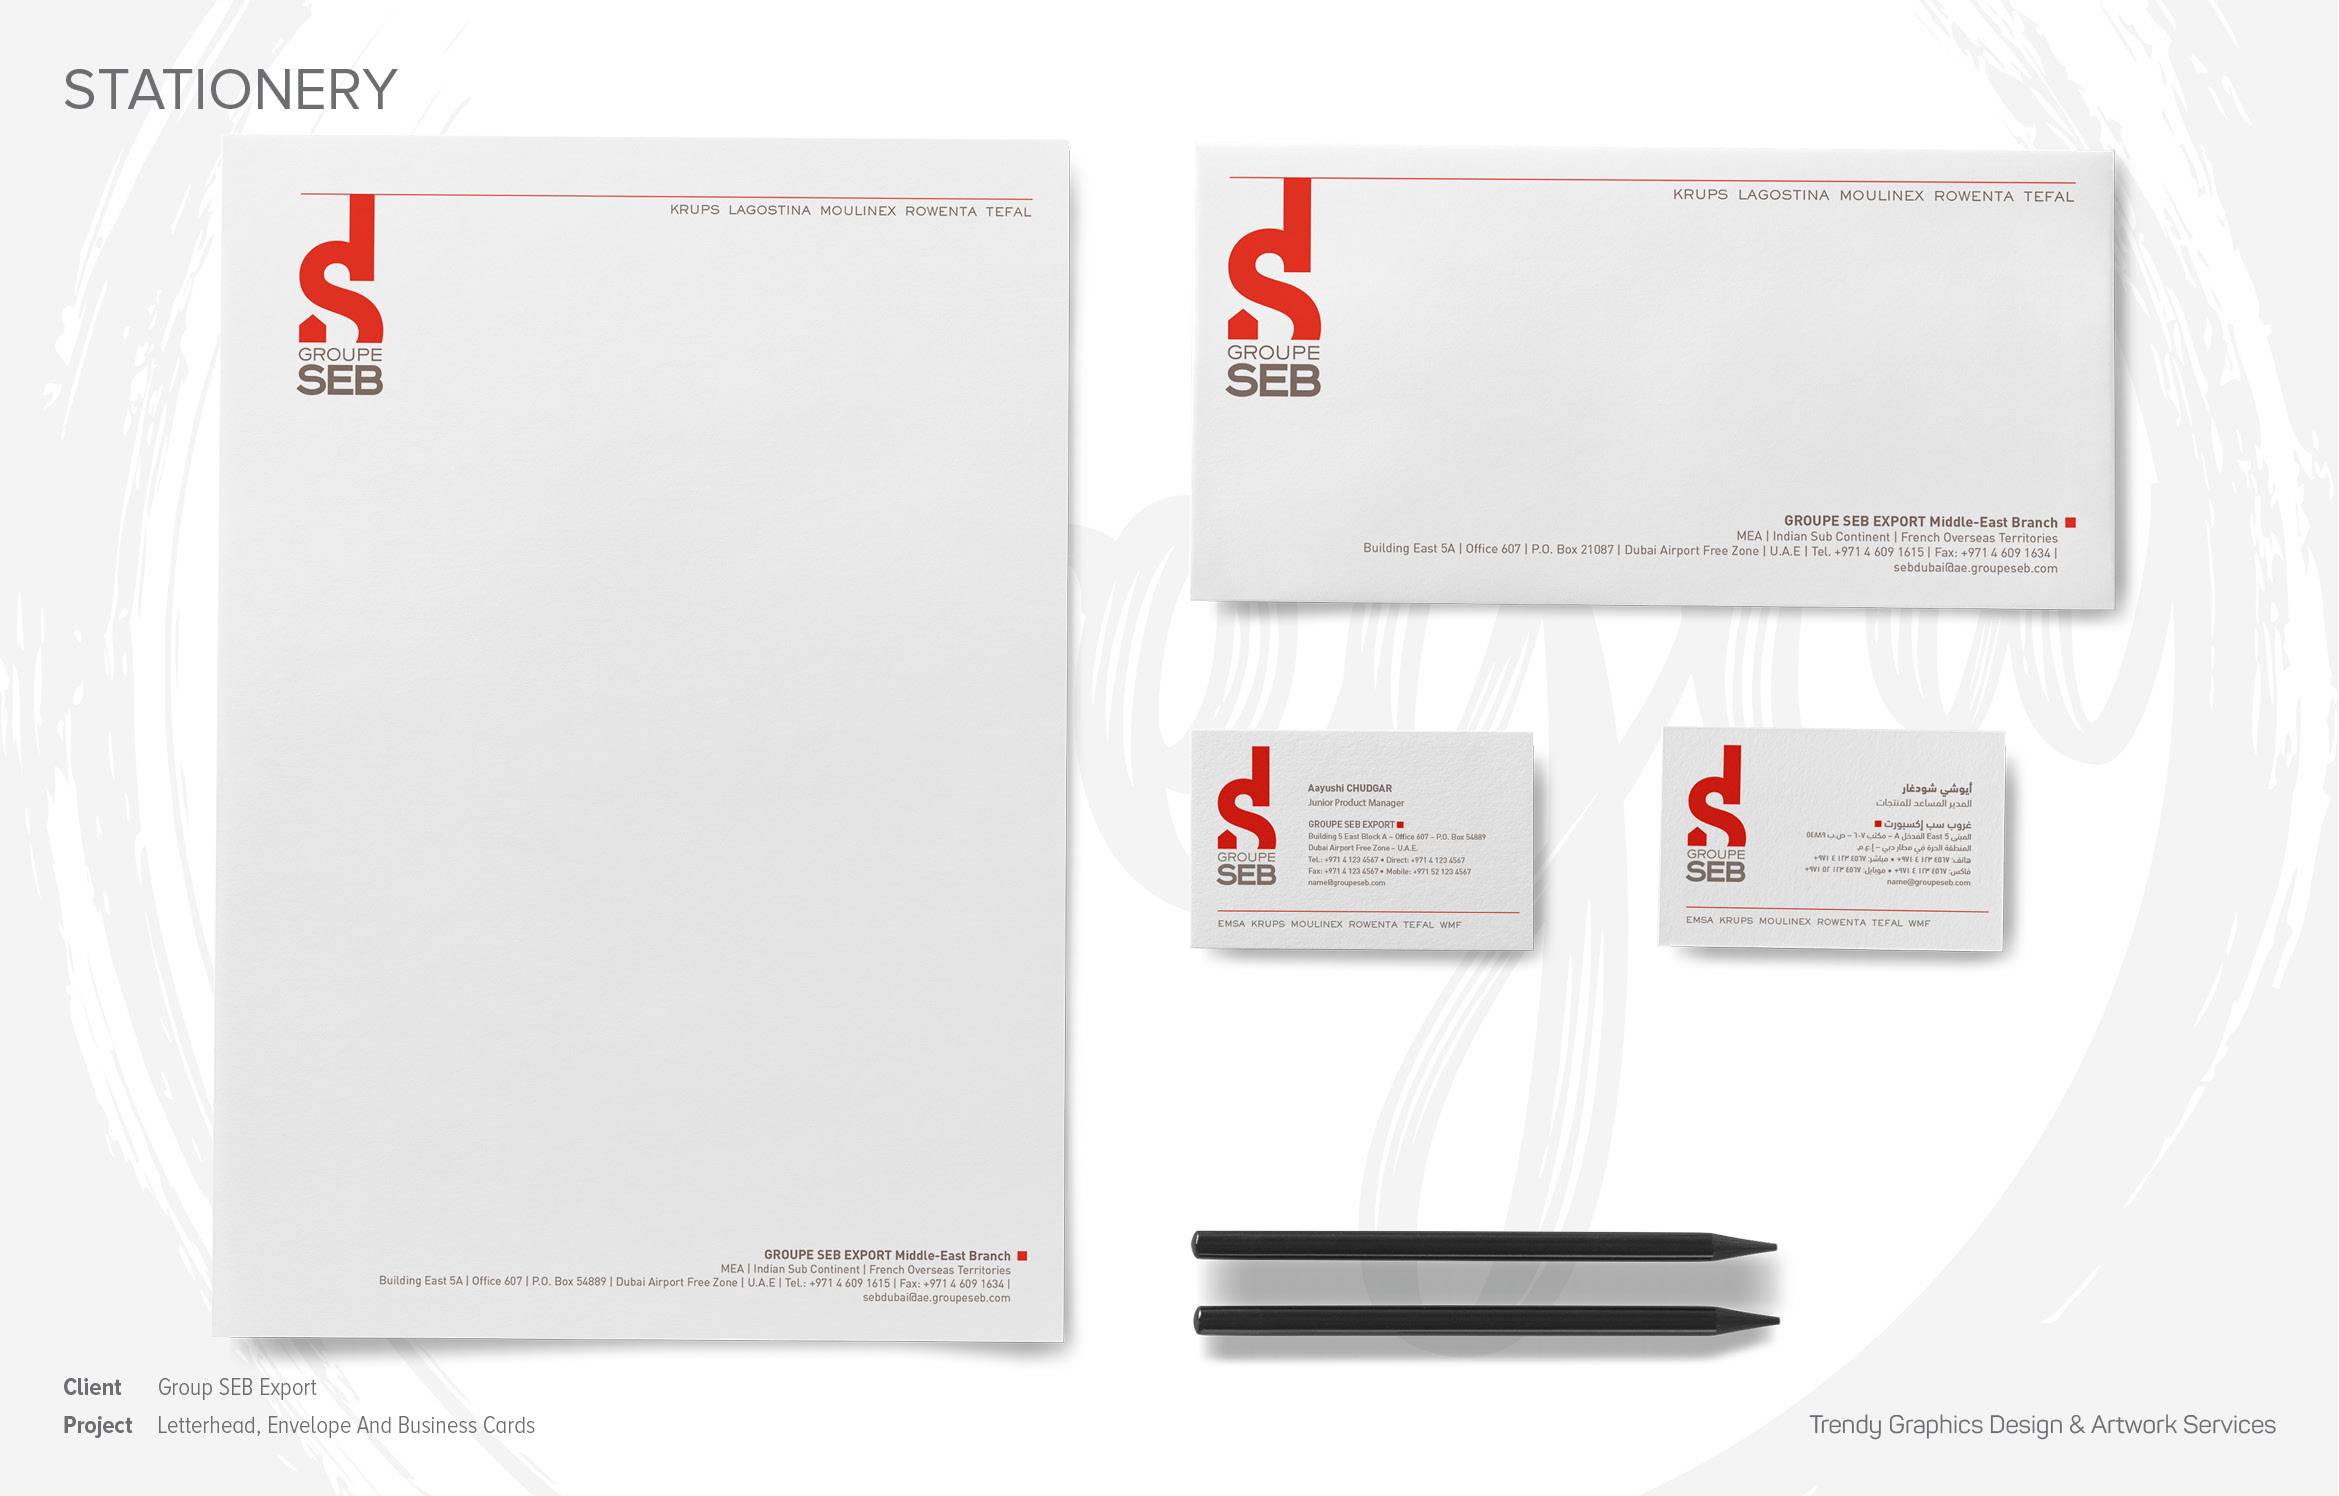 Group SEB Export – Letterhead, Envelope And Business Cards